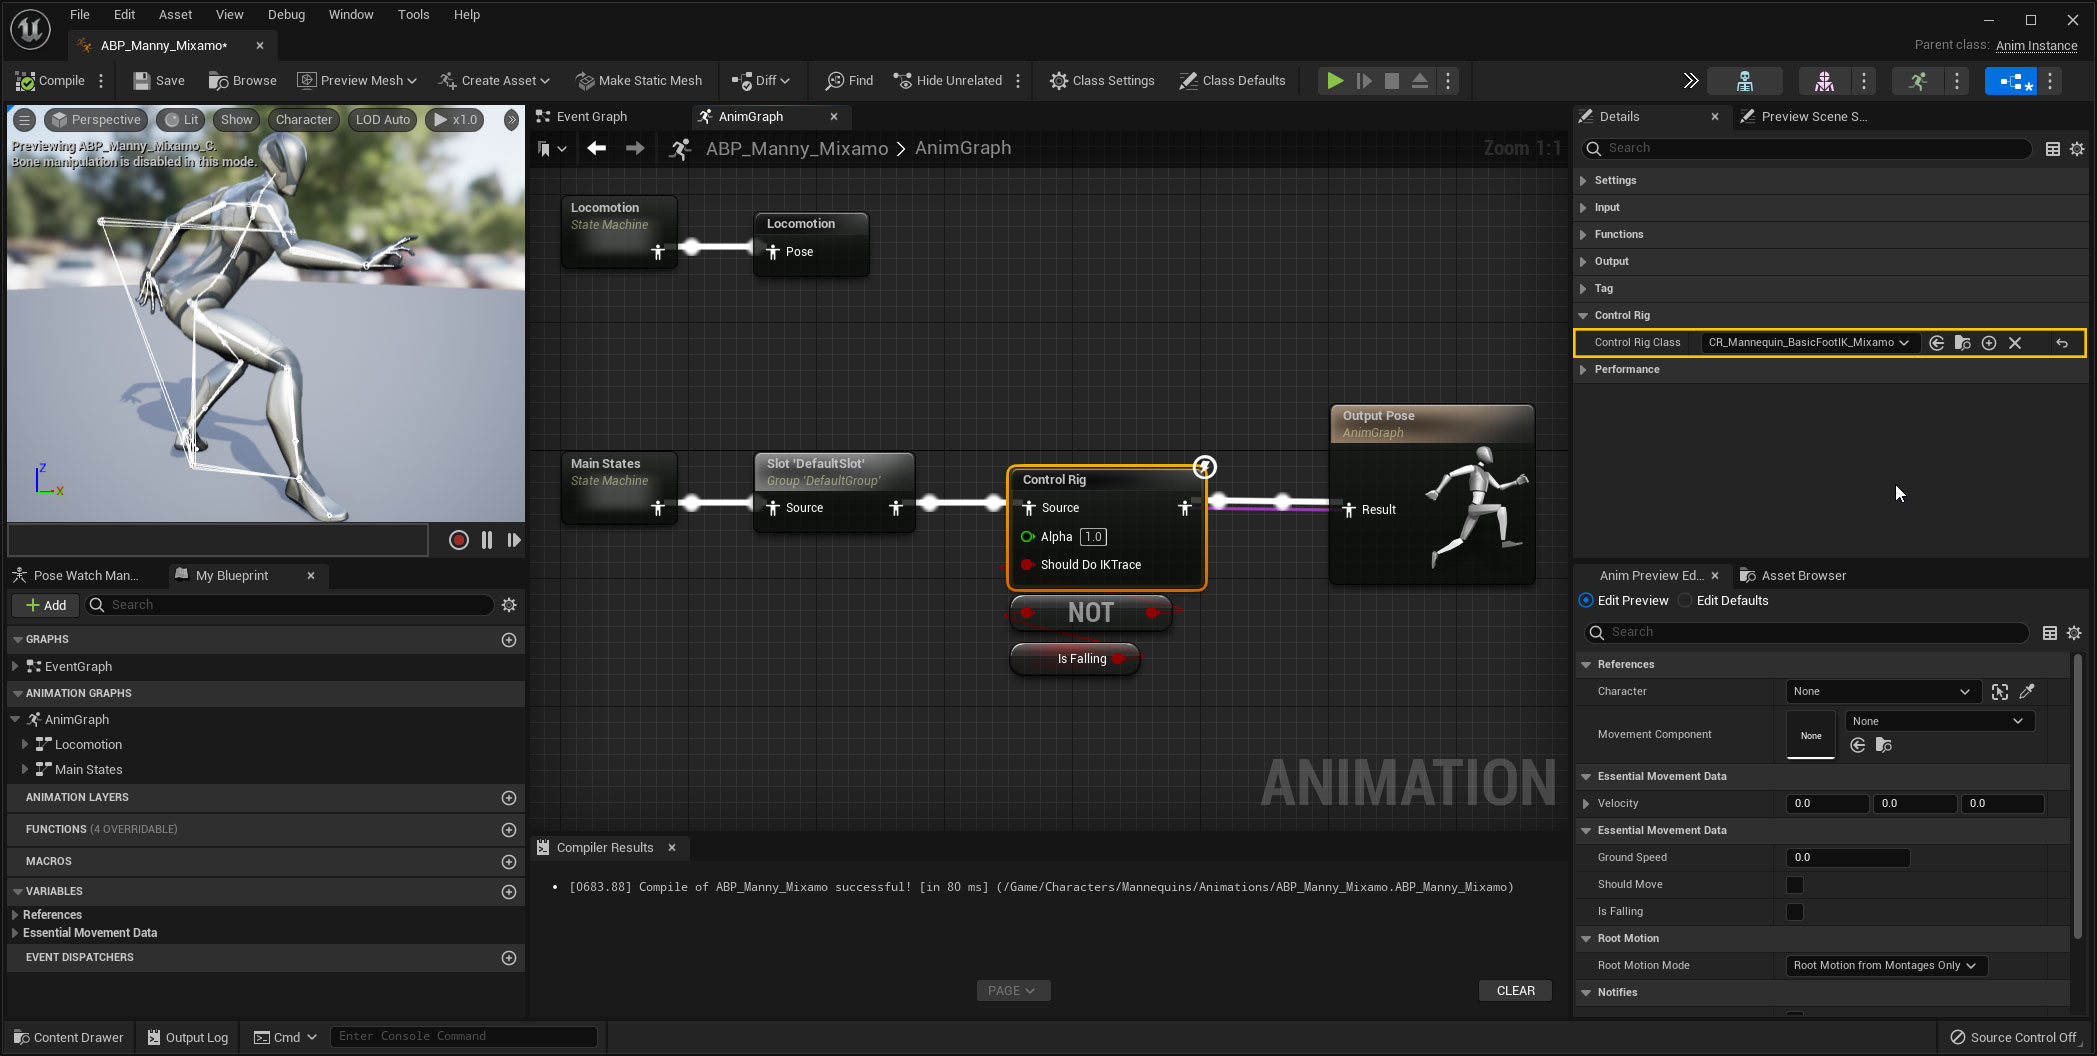 Using the modified Control Rig in the Animation Blueprint